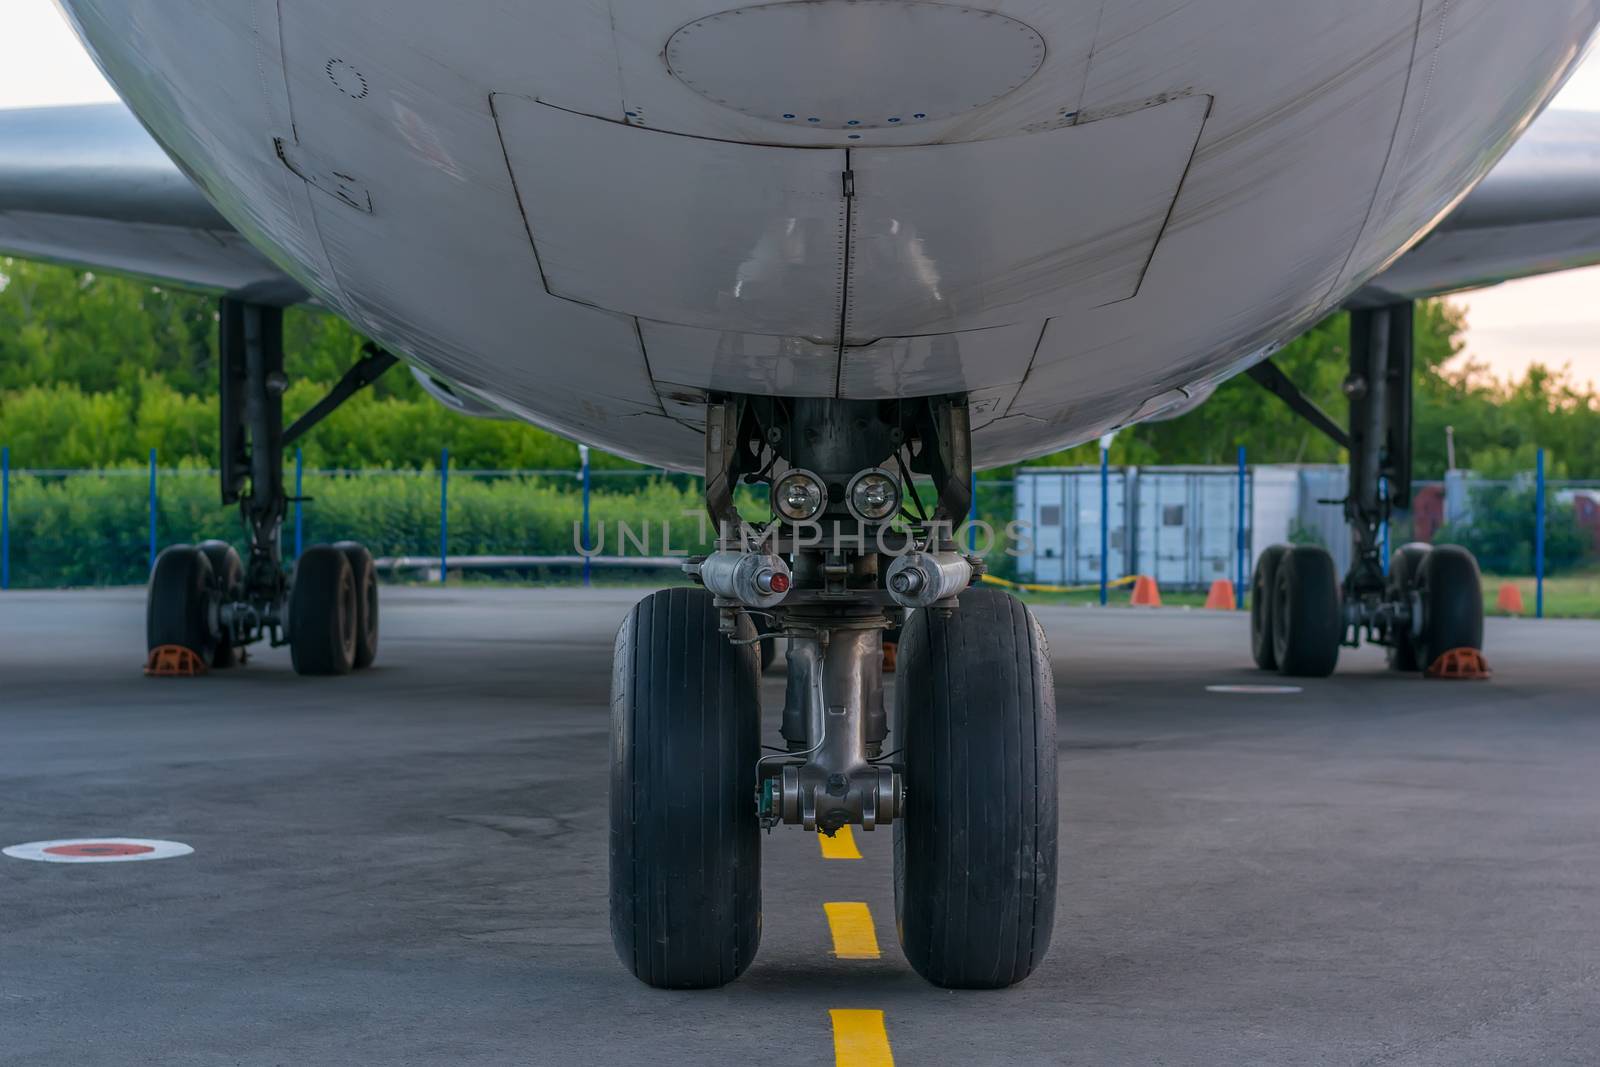 landing gear, wheels and bottom of the aircraft by jk3030